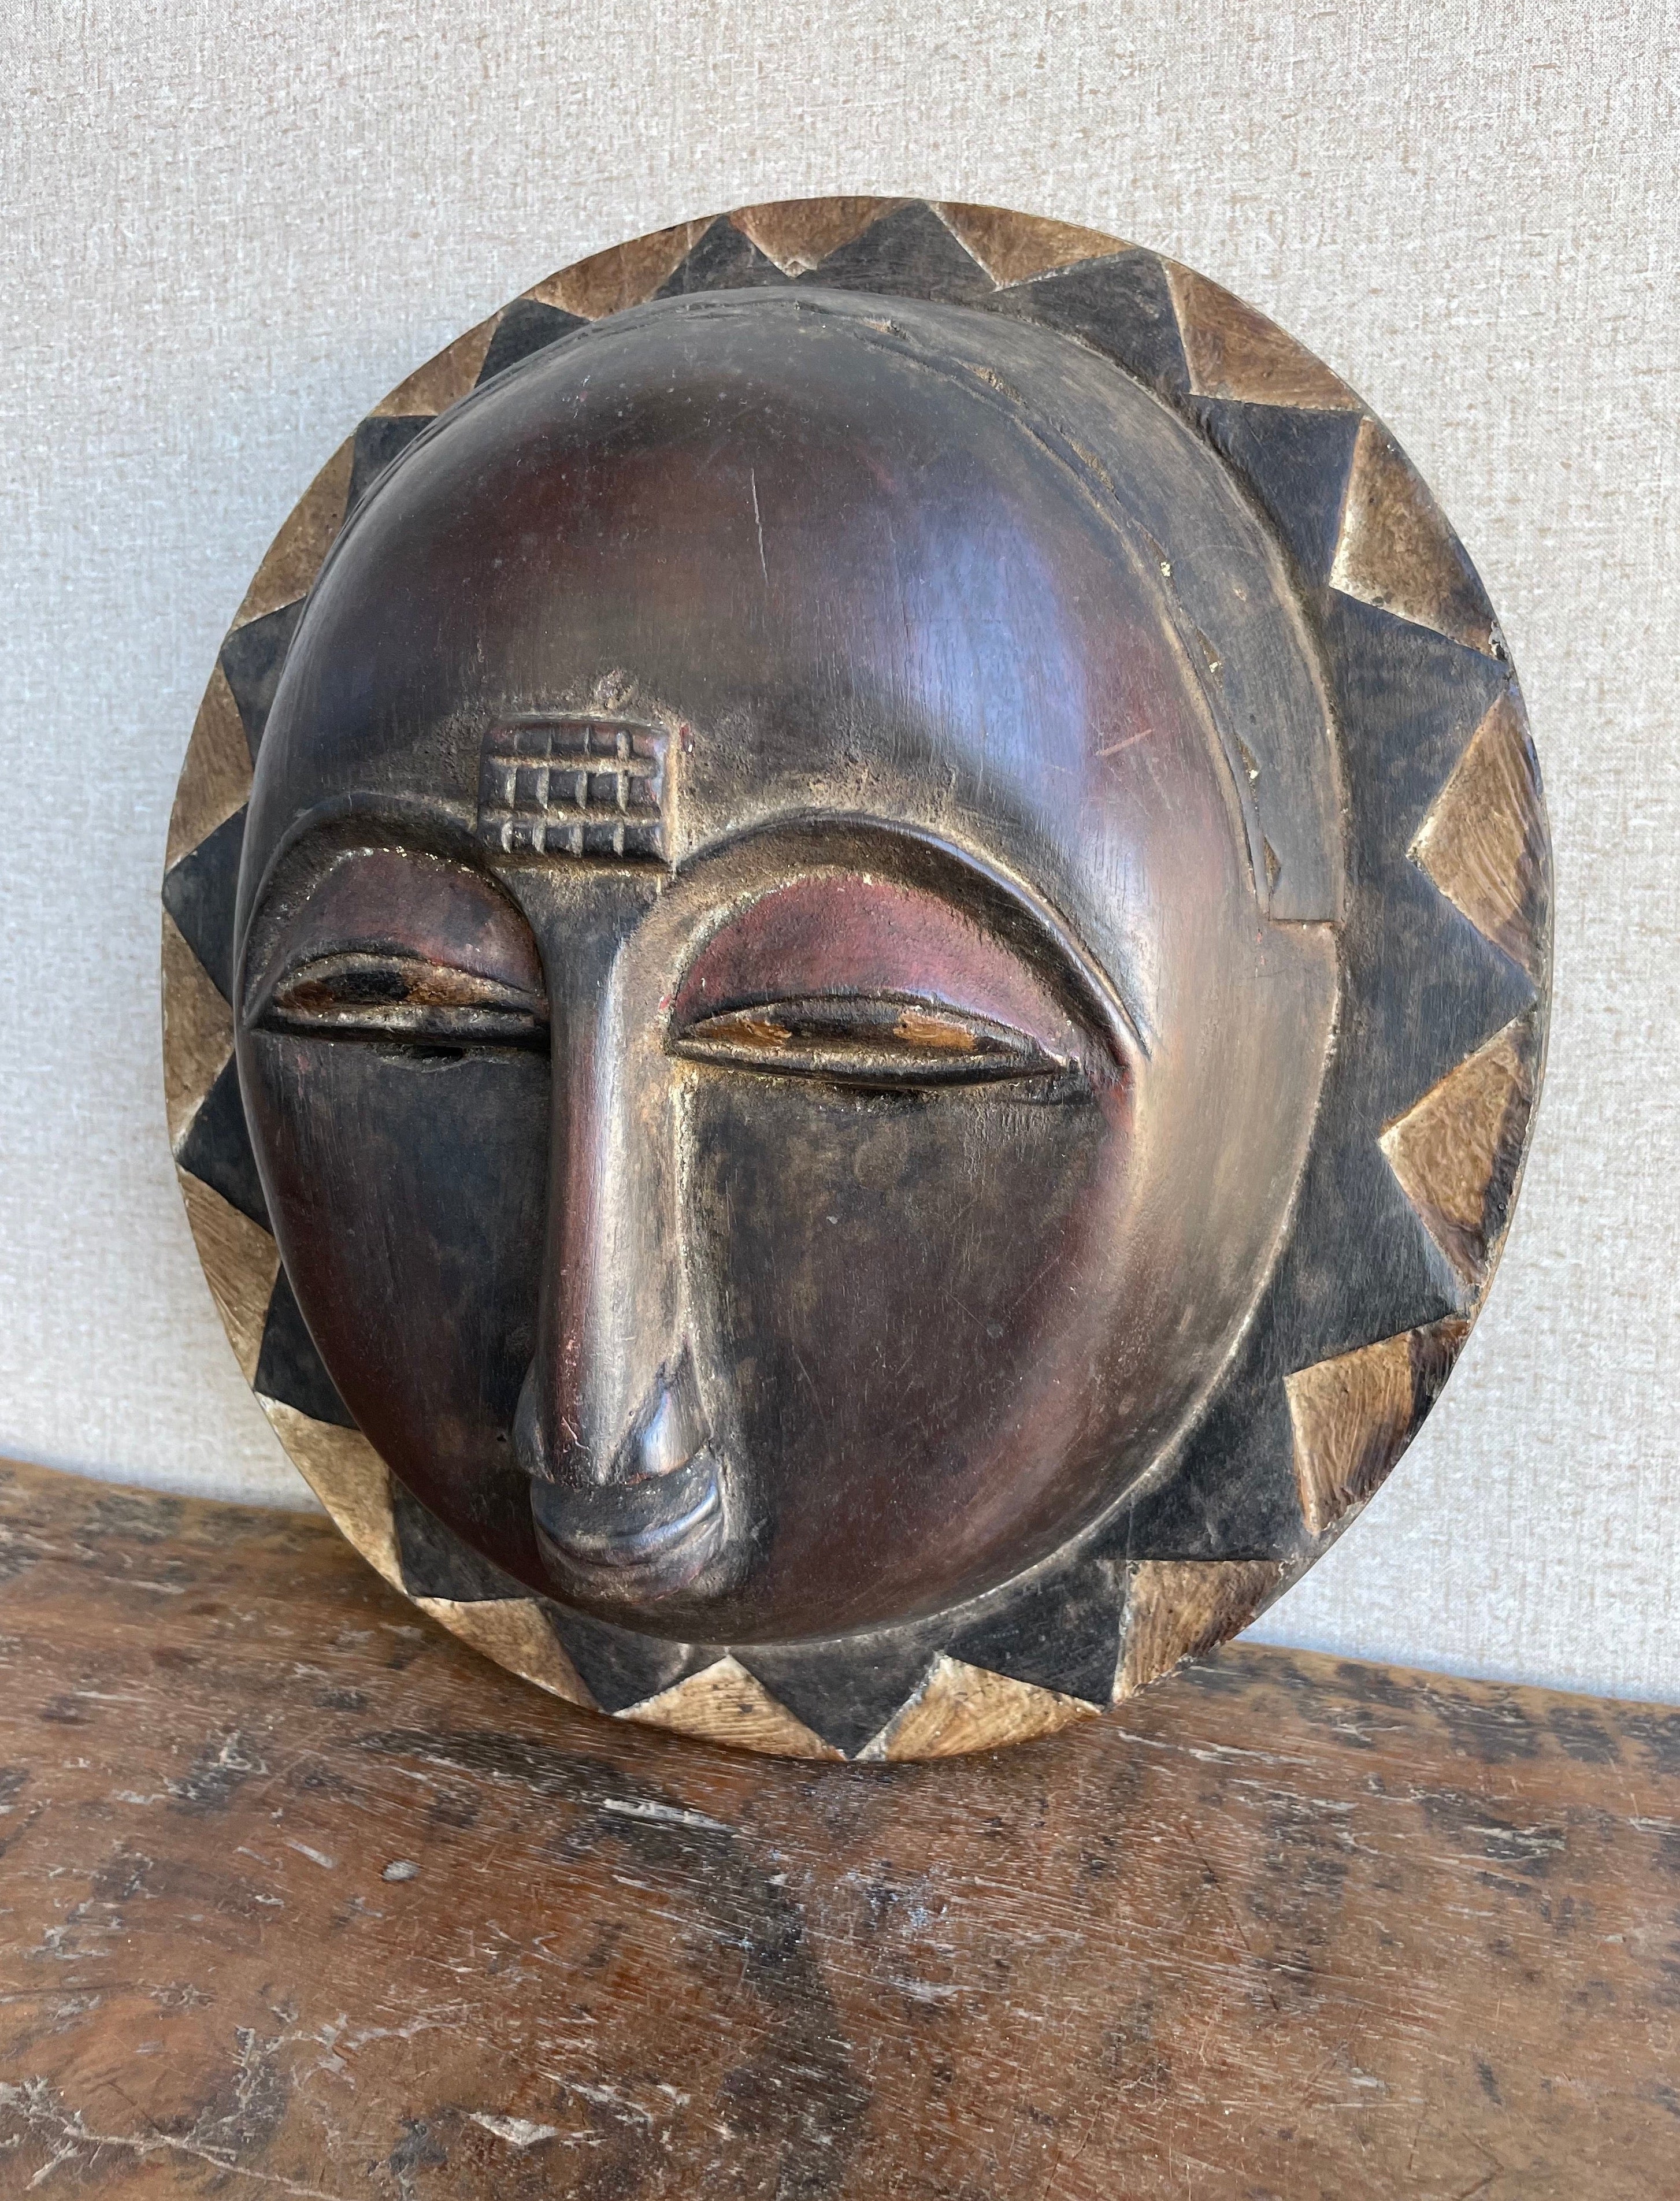 Handcrafted Masks - Contemporary - African Art - Statues - Wood -  Home Decor - Wall - Baule - Moon - Vintage